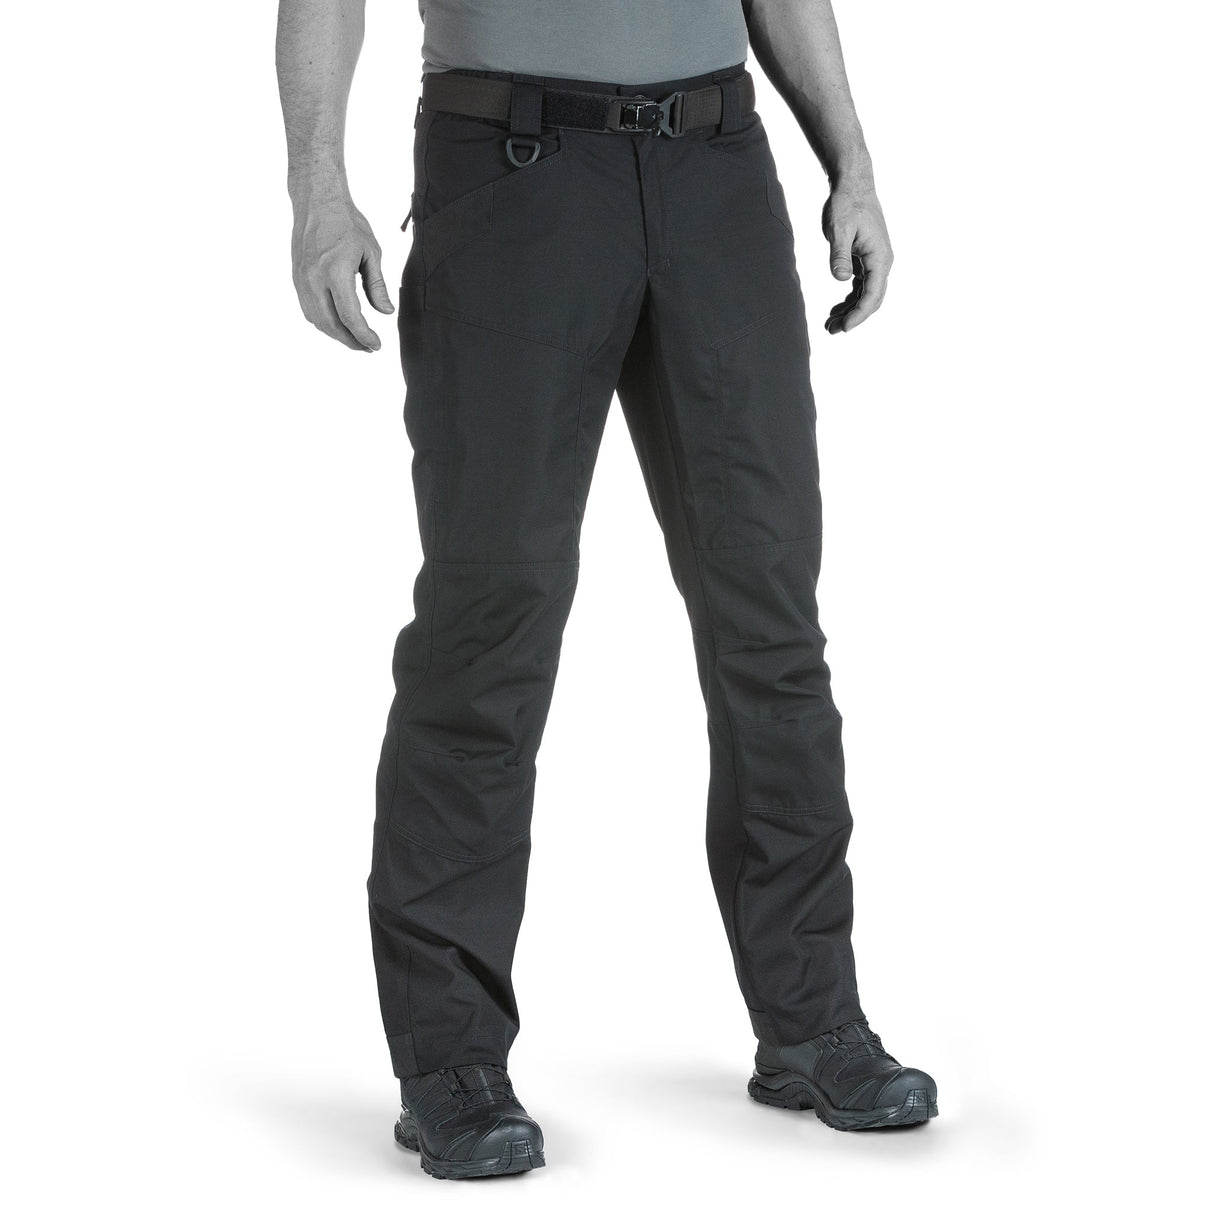 UF PRO P-40 Urban Tactical Pants - Functional and Stealthy Gear Kangaroo / 32/30